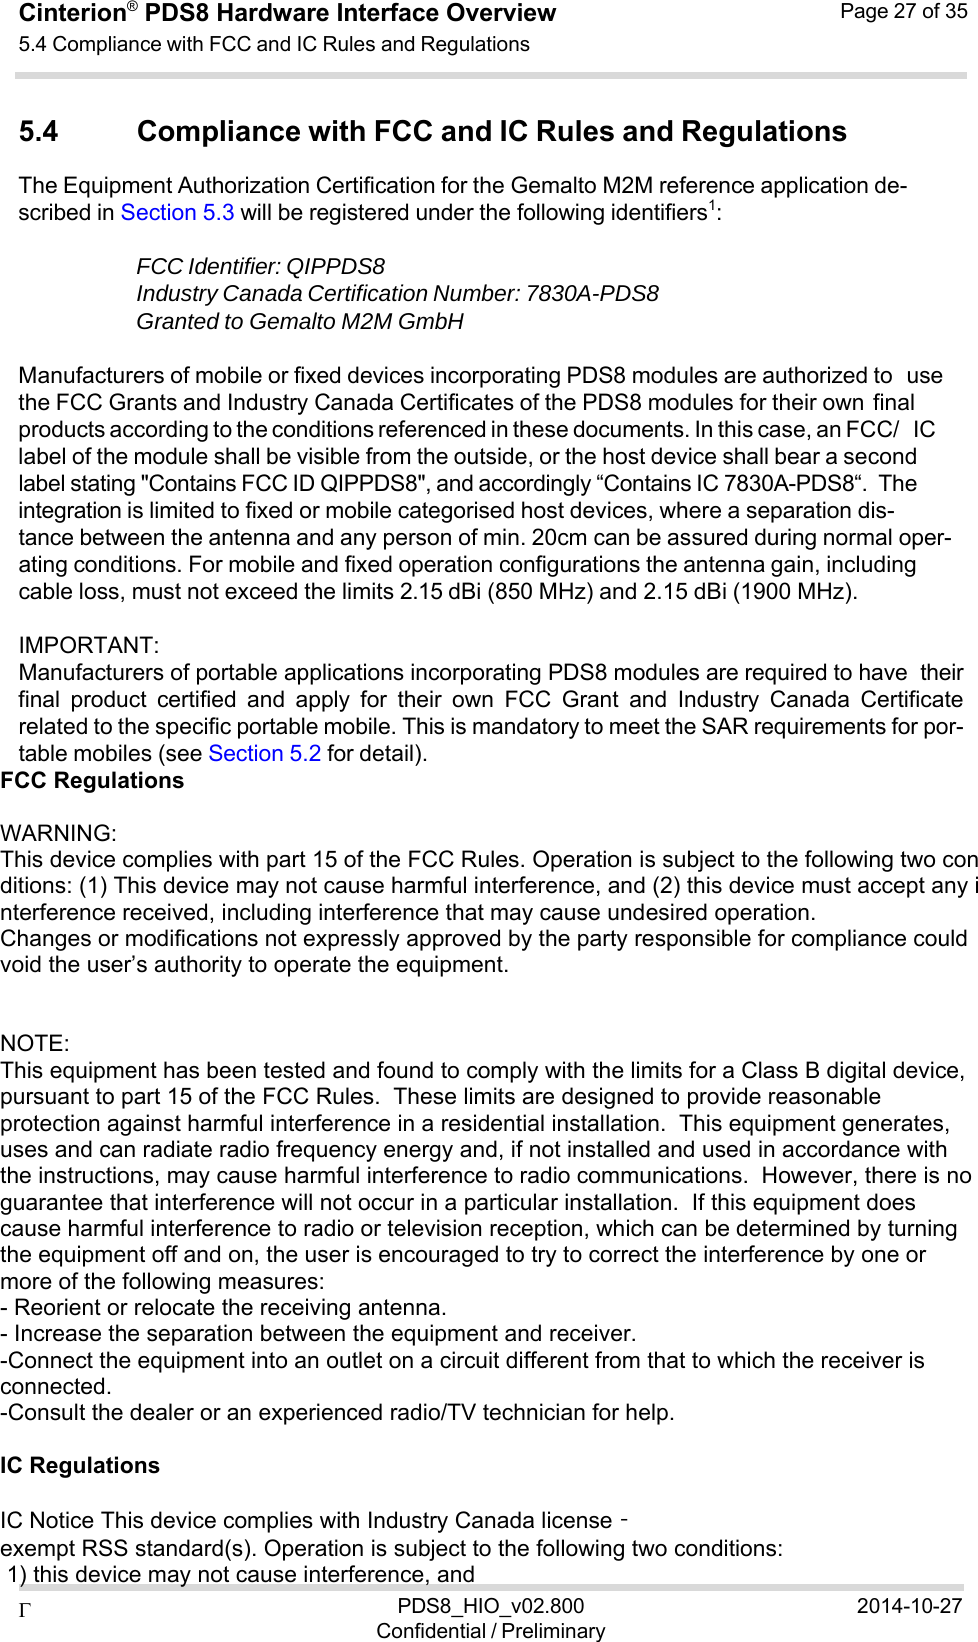  PDS8_HIO_v02.800Confidential / Preliminary2014-10-27Cinterion®  PDS8 Hardware Interface Overview 5.4 Compliance with FCC and IC Rules and Regulations Page 27 of 35   5.4 Compliance with FCC and IC Rules and Regulations The Equipment Authorization Certification for the Gemalto M2M reference application de- scribed in Section 5.3 will be registered under the following identifiers1:  FCC Identifier: QIPPDS8 Industry Canada Certification Number: 7830A-PDS8 Granted to Gemalto M2M GmbH  Manufacturers of mobile or fixed devices incorporating PDS8 modules are authorized to use the FCC Grants and Industry Canada Certificates of the PDS8 modules for their own final products according to the conditions referenced in these documents. In this case, an FCC/ IC label of the module shall be visible from the outside, or the host device shall bear a second label stating &quot;Contains FCC ID QIPPDS8&quot;, and accordingly “Contains IC 7830A-PDS8“. The integration is limited to fixed or mobile categorised host devices, where a separation dis- tance between the antenna and any person of min. 20cm can be assured during normal oper- ating conditions. For mobile and fixed operation configurations the antenna gain, including cable loss, must not exceed the limits 2.15 dBi (850 MHz) and 2.15 dBi (1900 MHz).  IMPORTANT: Manufacturers of portable applications incorporating PDS8 modules are required to have their final  product  certified  and  apply  for  their  own  FCC  Grant  and  Industry  Canada  Certificate related to the specific portable mobile. This is mandatory to meet the SAR requirements for por- table mobiles (see Section 5.2 for detail). FCC Regulations    WARNING: This device complies with part 15 of the FCC Rules. Operation is subject to the following two conditions: (1) This device may not cause harmful interference, and (2) this device must accept any interference received, including interference that may cause undesired operation. Changes or modifications not expressly approved by the party responsible for compliance could void the user’s authority to operate the equipment.    NOTE:  This equipment has been tested and found to comply with the limits for a Class B digital device, pursuant to part 15 of the FCC Rules.  These limits are designed to provide reasonable protection against harmful interference in a residential installation.  This equipment generates, uses and can radiate radio frequency energy and, if not installed and used in accordance with the instructions, may cause harmful interference to radio communications.  However, there is no guarantee that interference will not occur in a particular installation.  If this equipment does cause harmful interference to radio or television reception, which can be determined by turning the equipment off and on, the user is encouraged to try to correct the interference by one or more of the following measures: - Reorient or relocate the receiving antenna. - Increase the separation between the equipment and receiver. -Connect the equipment into an outlet on a circuit different from that to which the receiver is connected. -Consult the dealer or an experienced radio/TV technician for help.   IC Regulations    IC Notice This device complies with Industry Canada license‐exempt RSS standard(s). Operation is subject to the following two conditions:   1) this device may not cause interference, and 